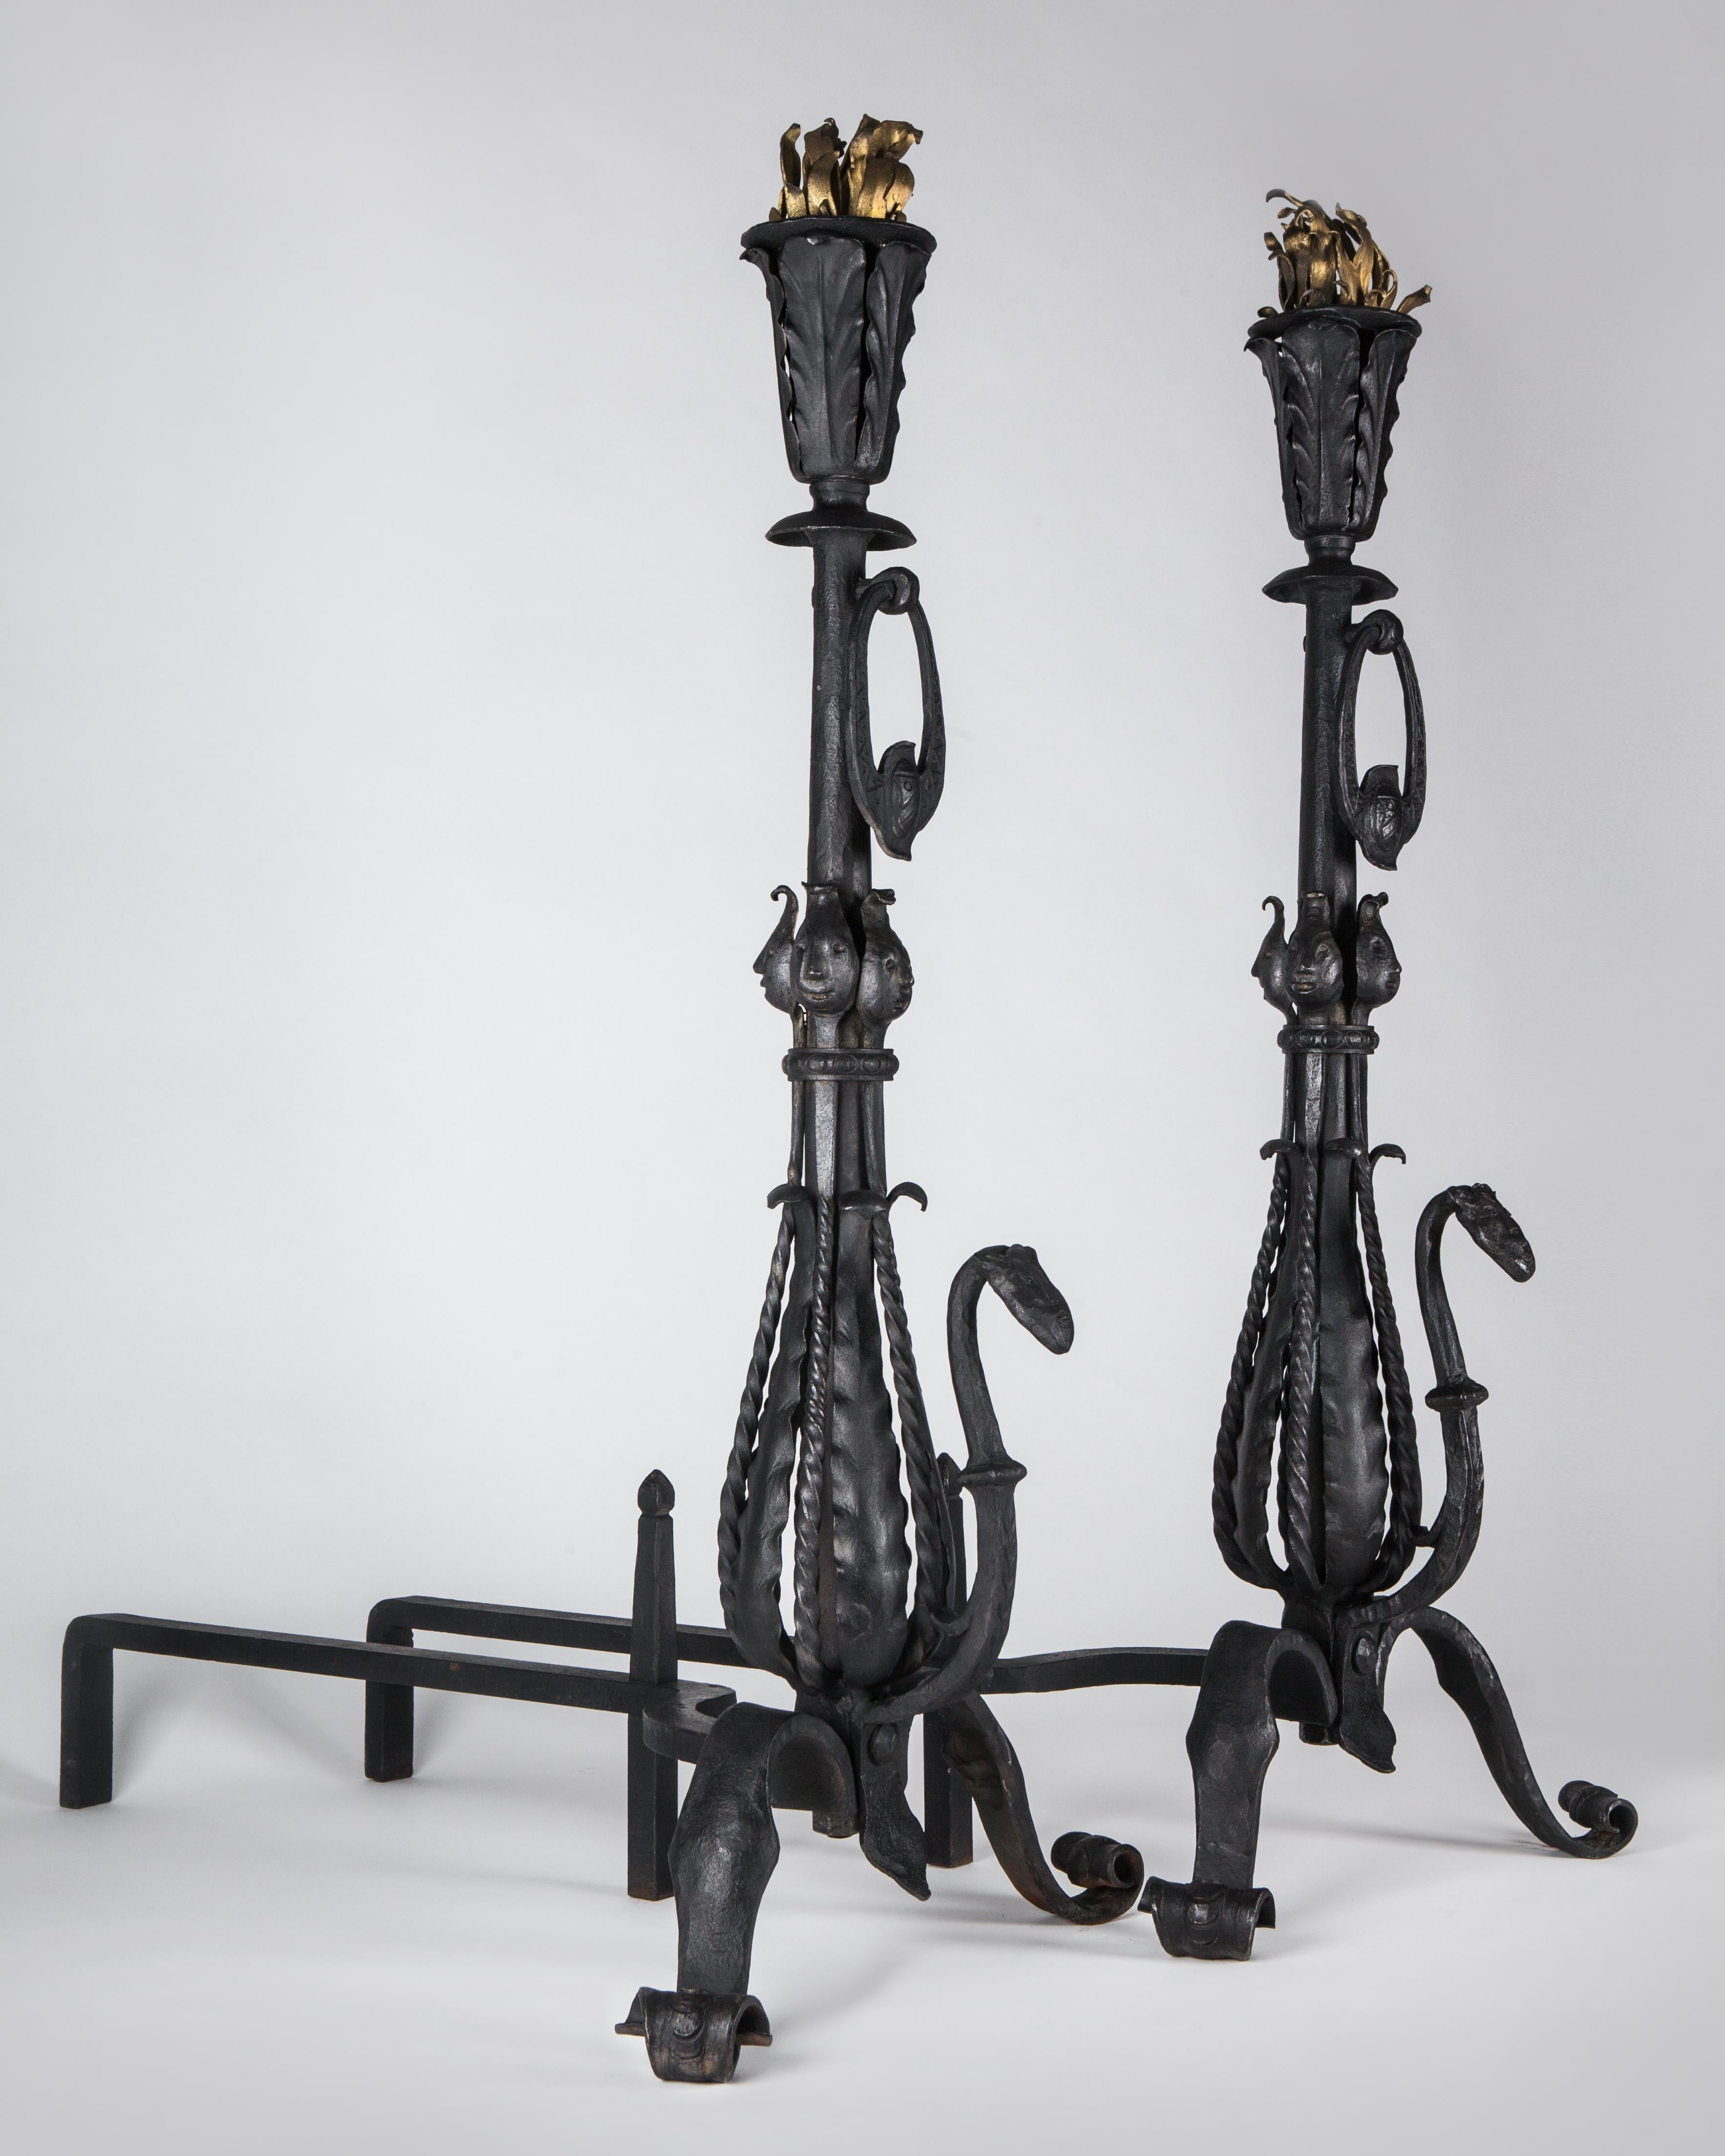 AFP0605

A pair of antique Arts & Crafts period wrought iron andirons with figural and leaf-form elements. Having scrolled feet, terminating in flaming torch finials,
circa 1920

Dimensions:
Overall: 40-1/4